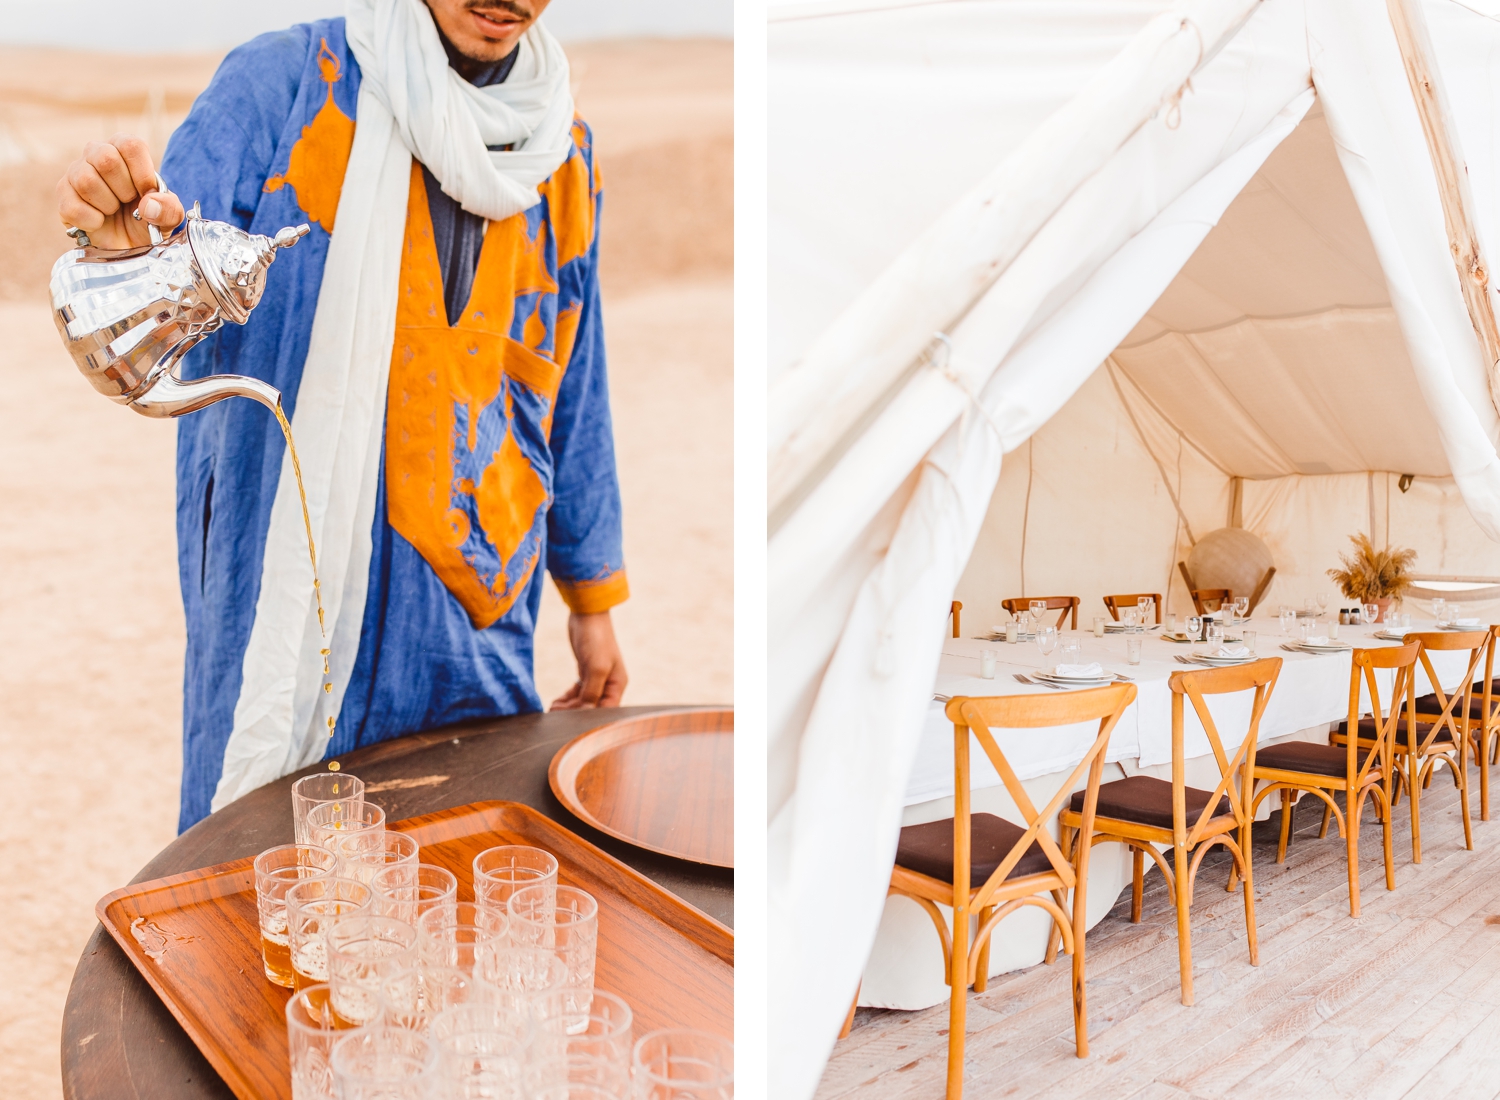 Man pouring tea for travelers in Afgay Desert | Dinner table set up under white tent in Afgay Desert | Brooke Michelle Photography